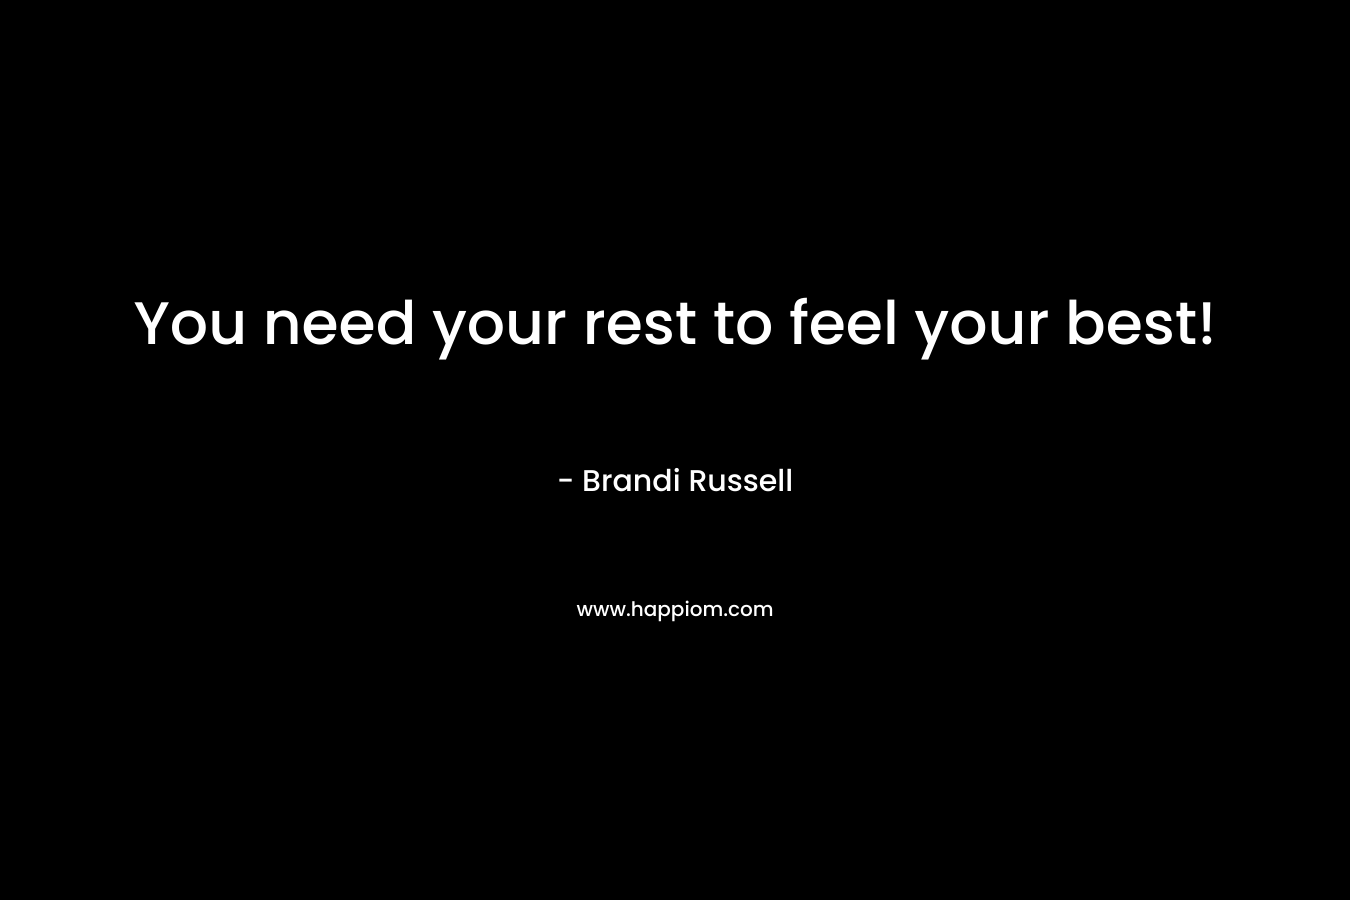 You need your rest to feel your best!